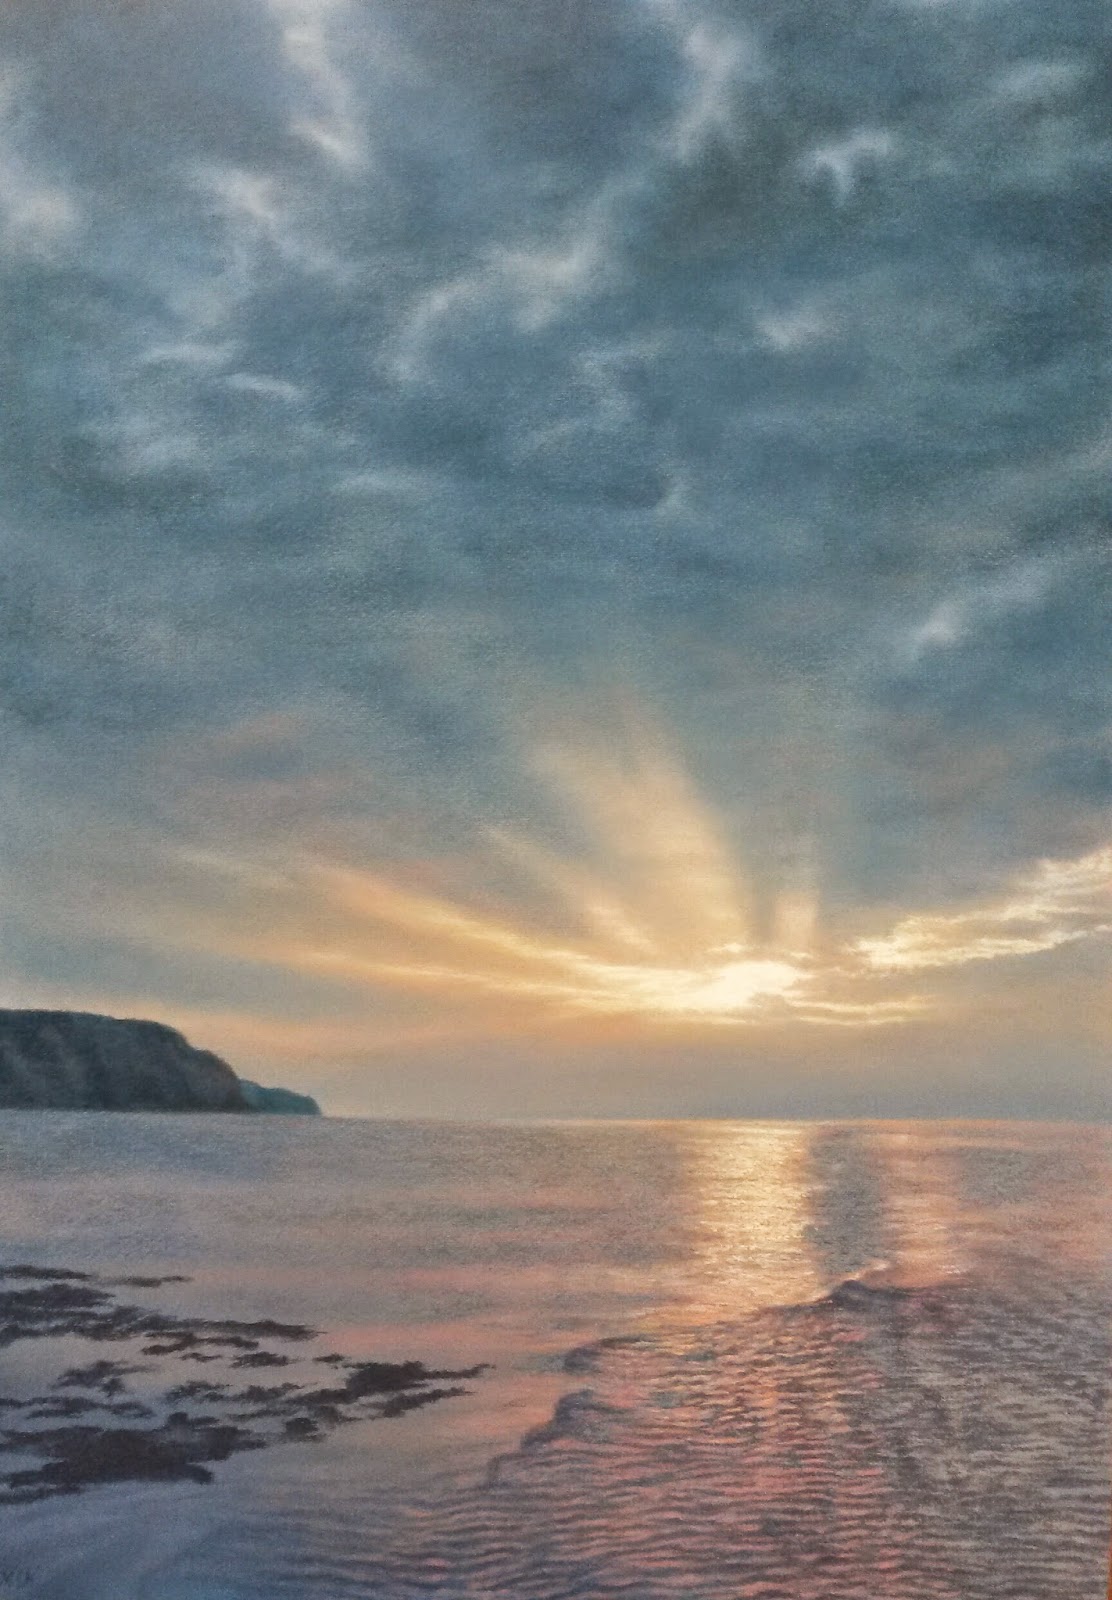 Sunset Reflections (Boulby Cliffs, Staithes)-Michael Howley Artist. A signed limited edition print from an original soft pastel painting